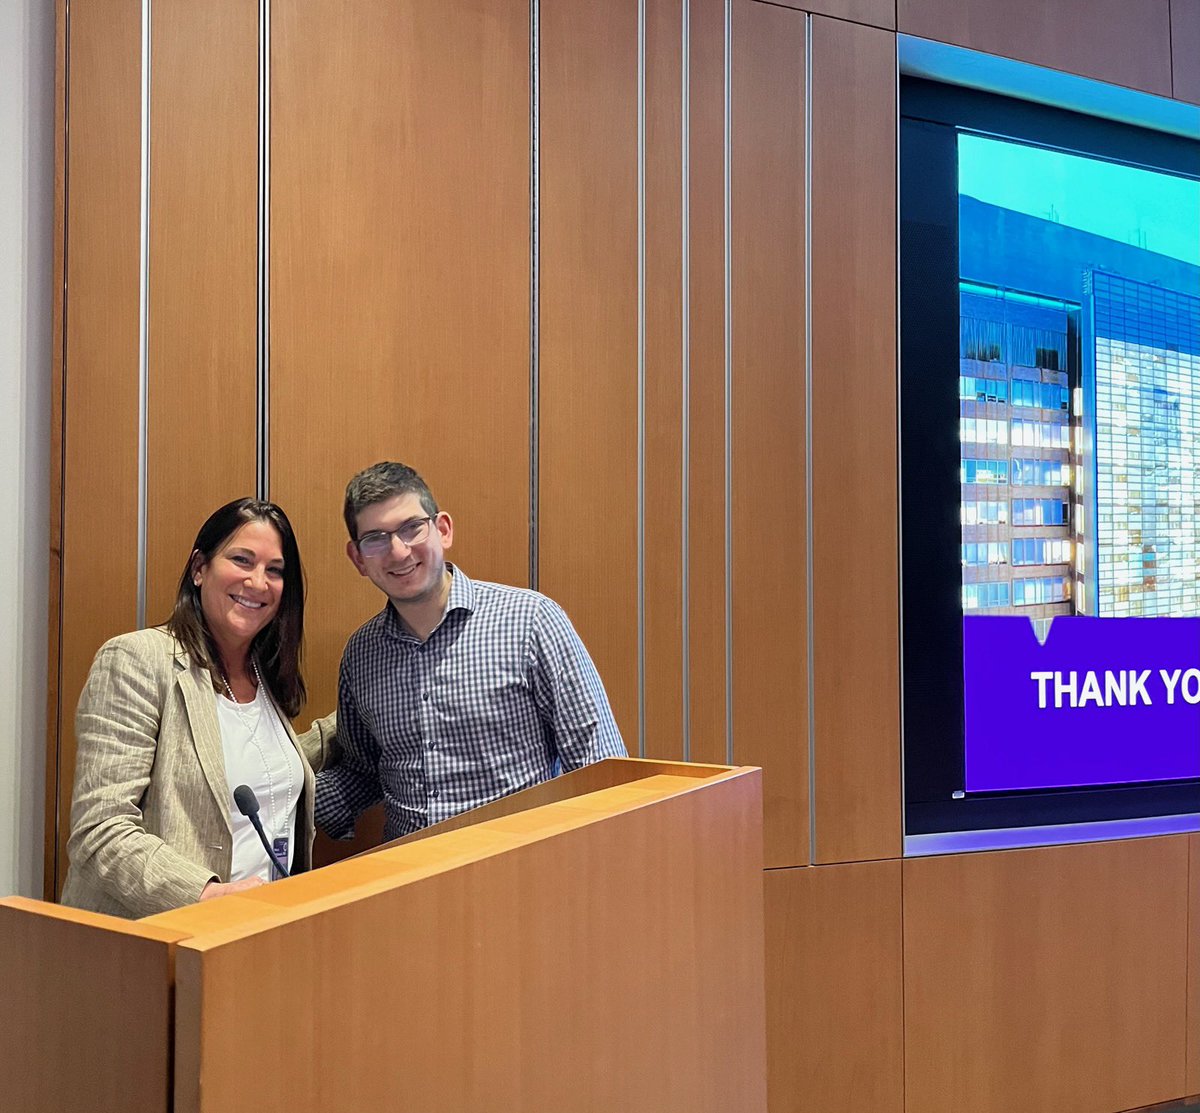 Congratulations to our R4 resident, @Mark_Kaminetzky, on his incredible contributions to research over the past few years and on receiving the @radiology_rsna Roentgen Resident Research Award!! @NYUImaging